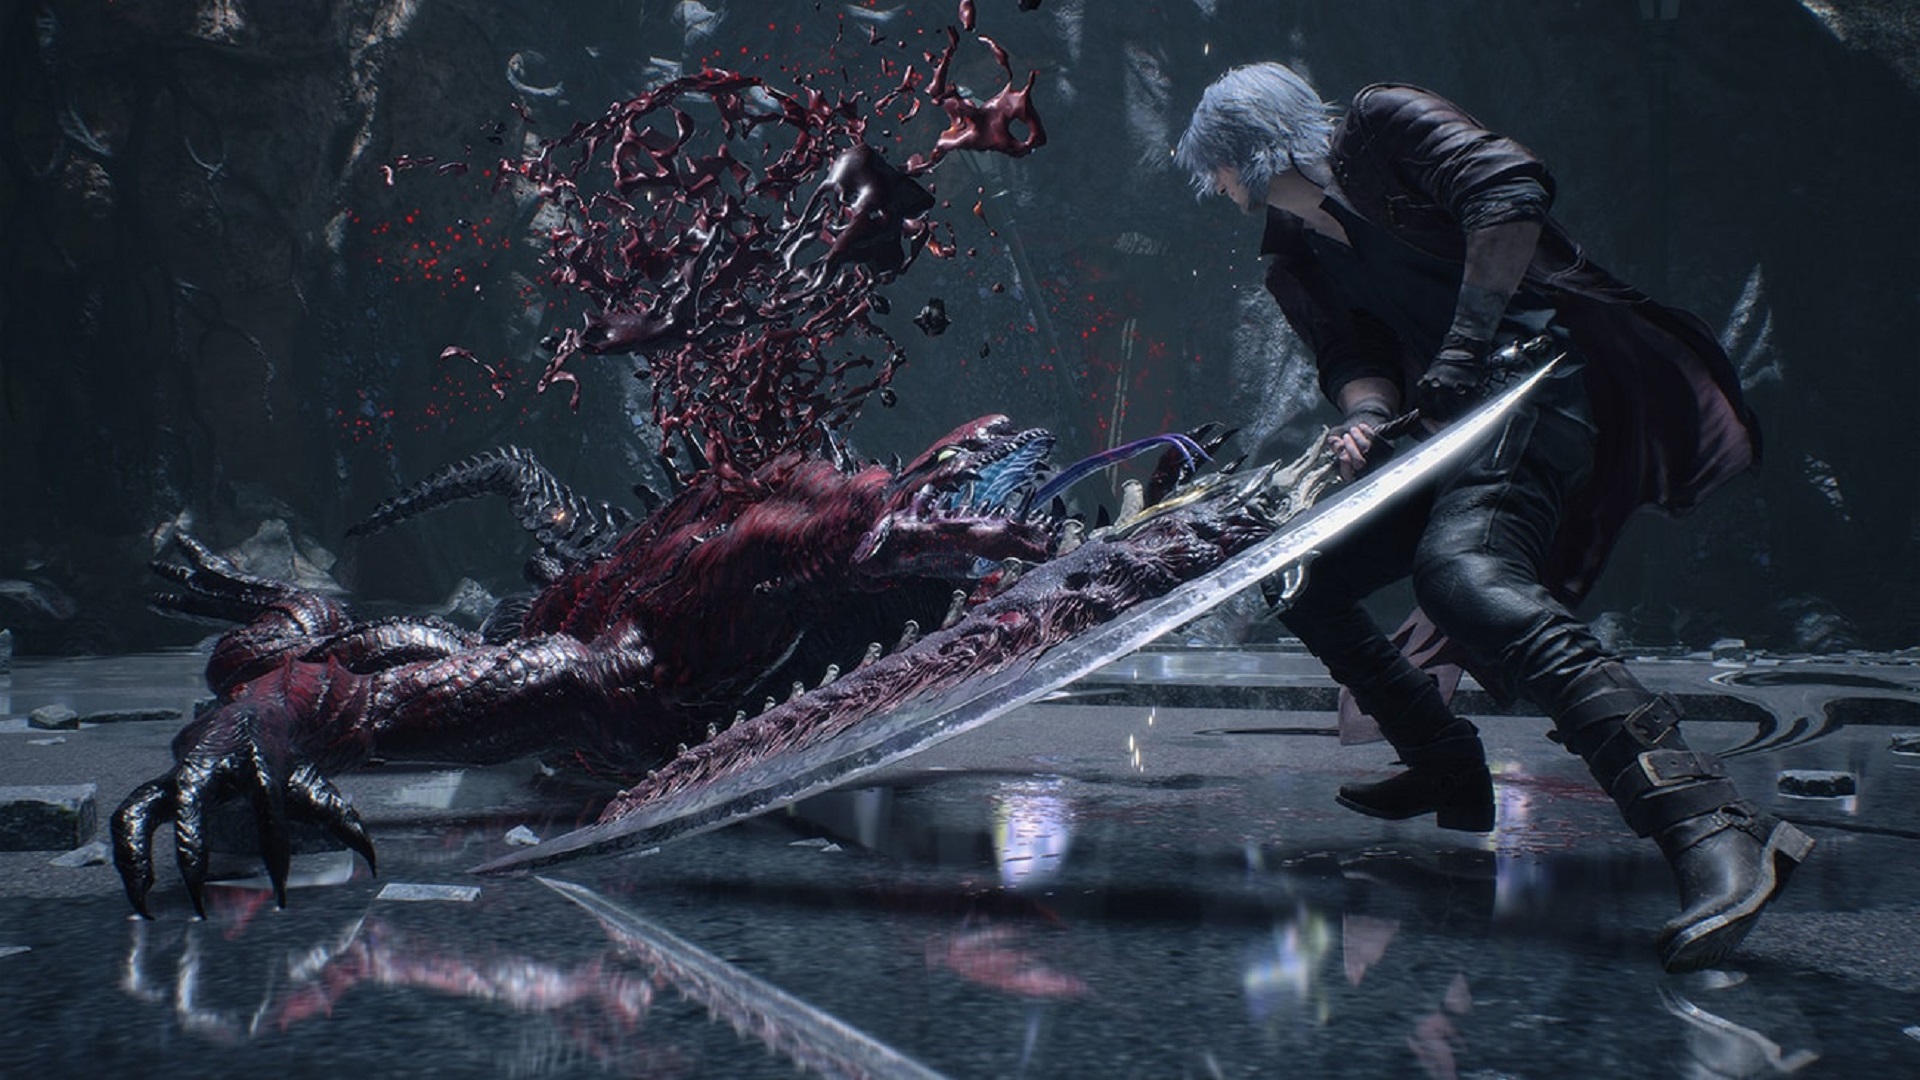 Reserve The sky space Devil May Cry 5 – Vergil DLC is Out for PS4, Xbox One, and PC in December  for $5